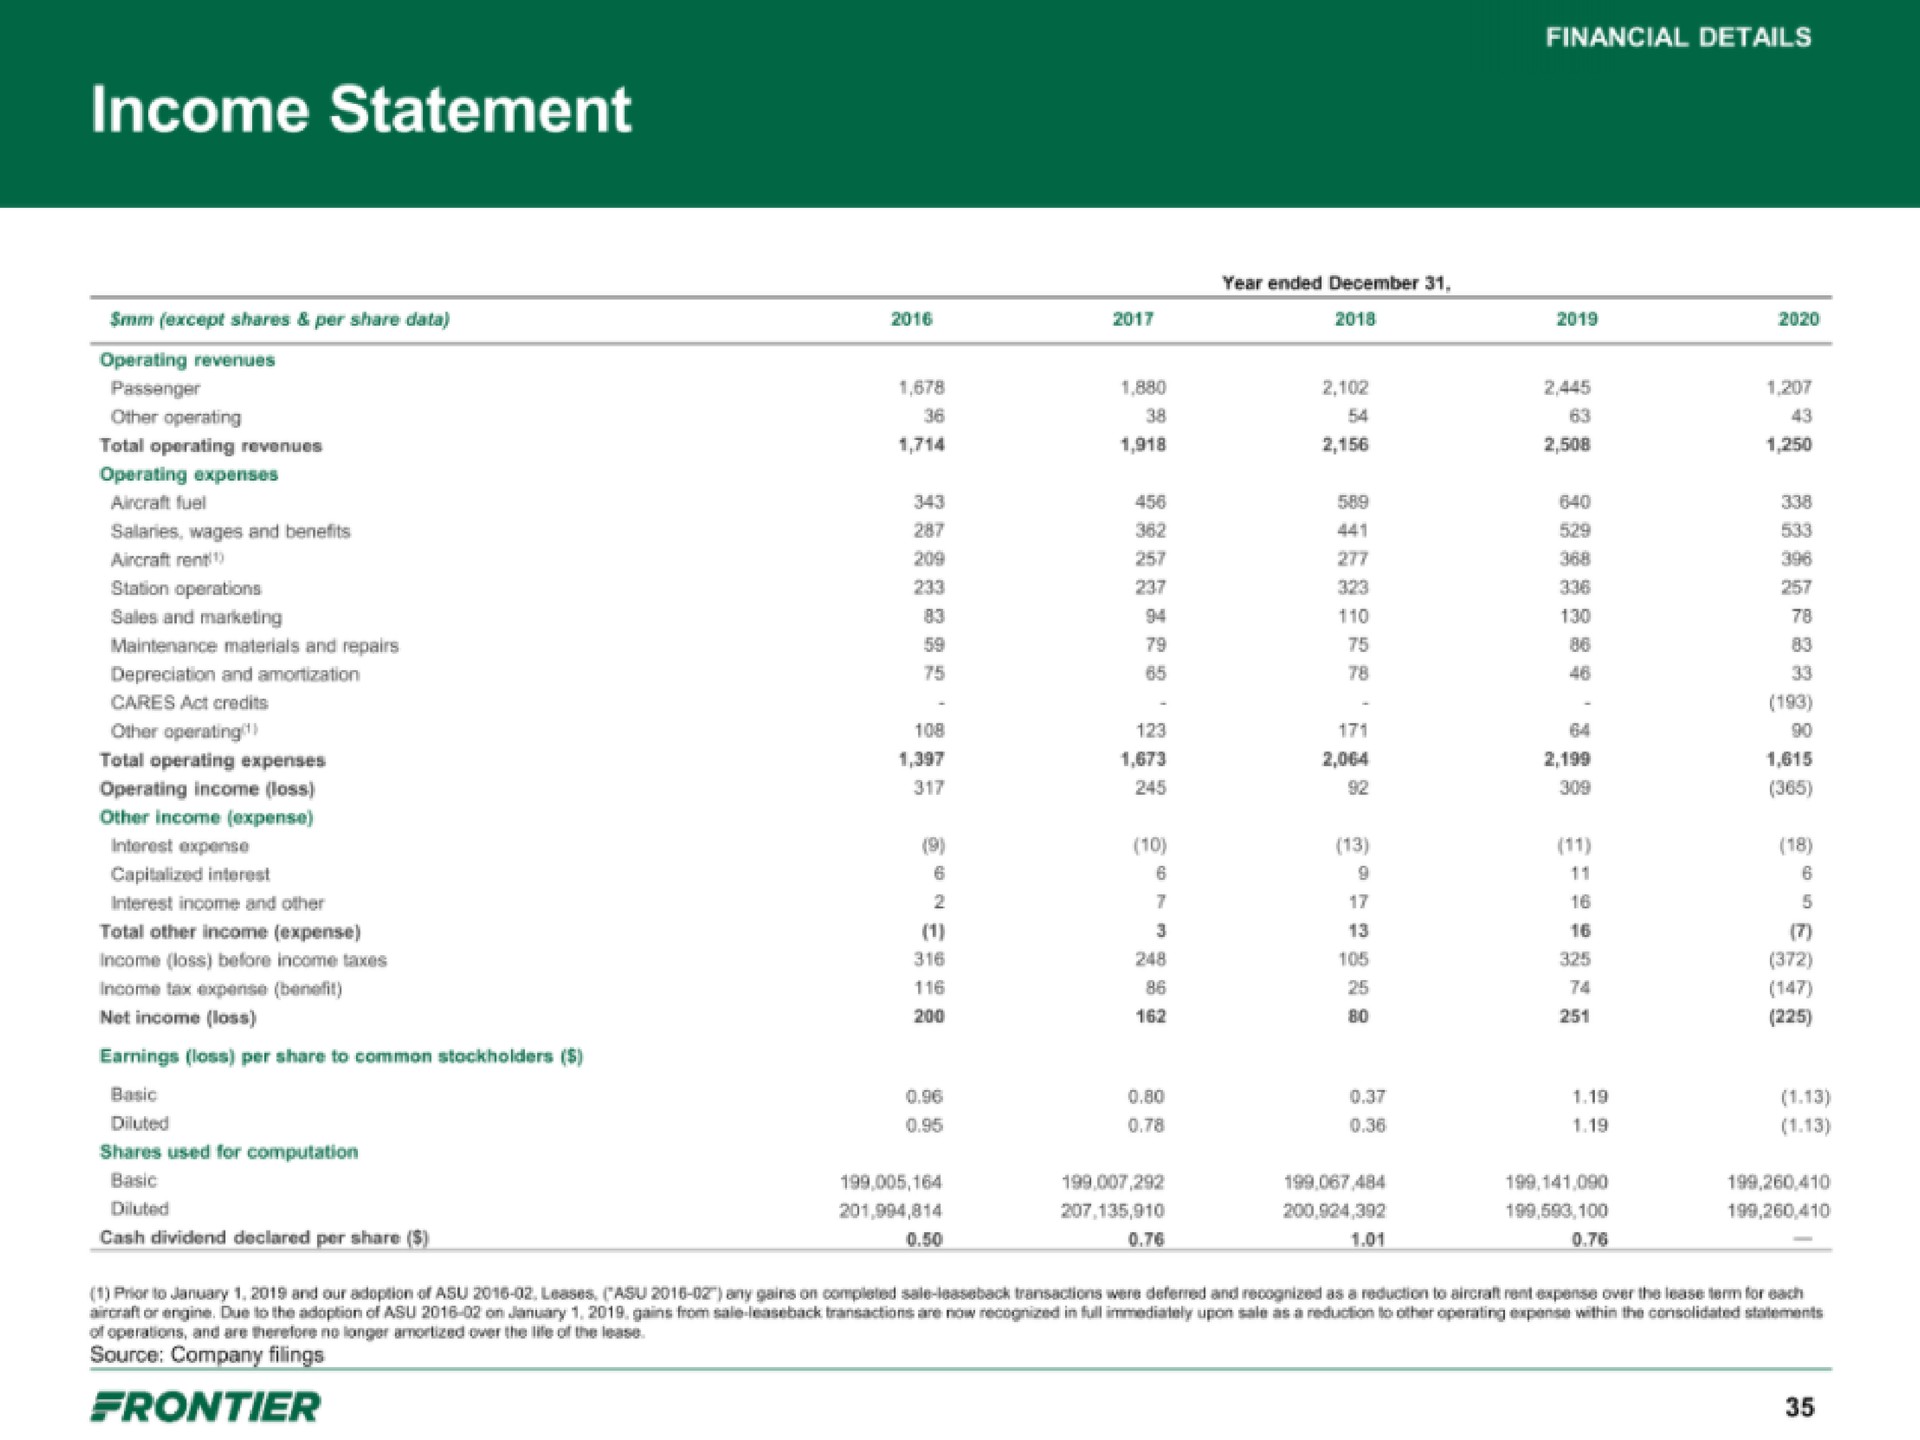 income statement | Frontier